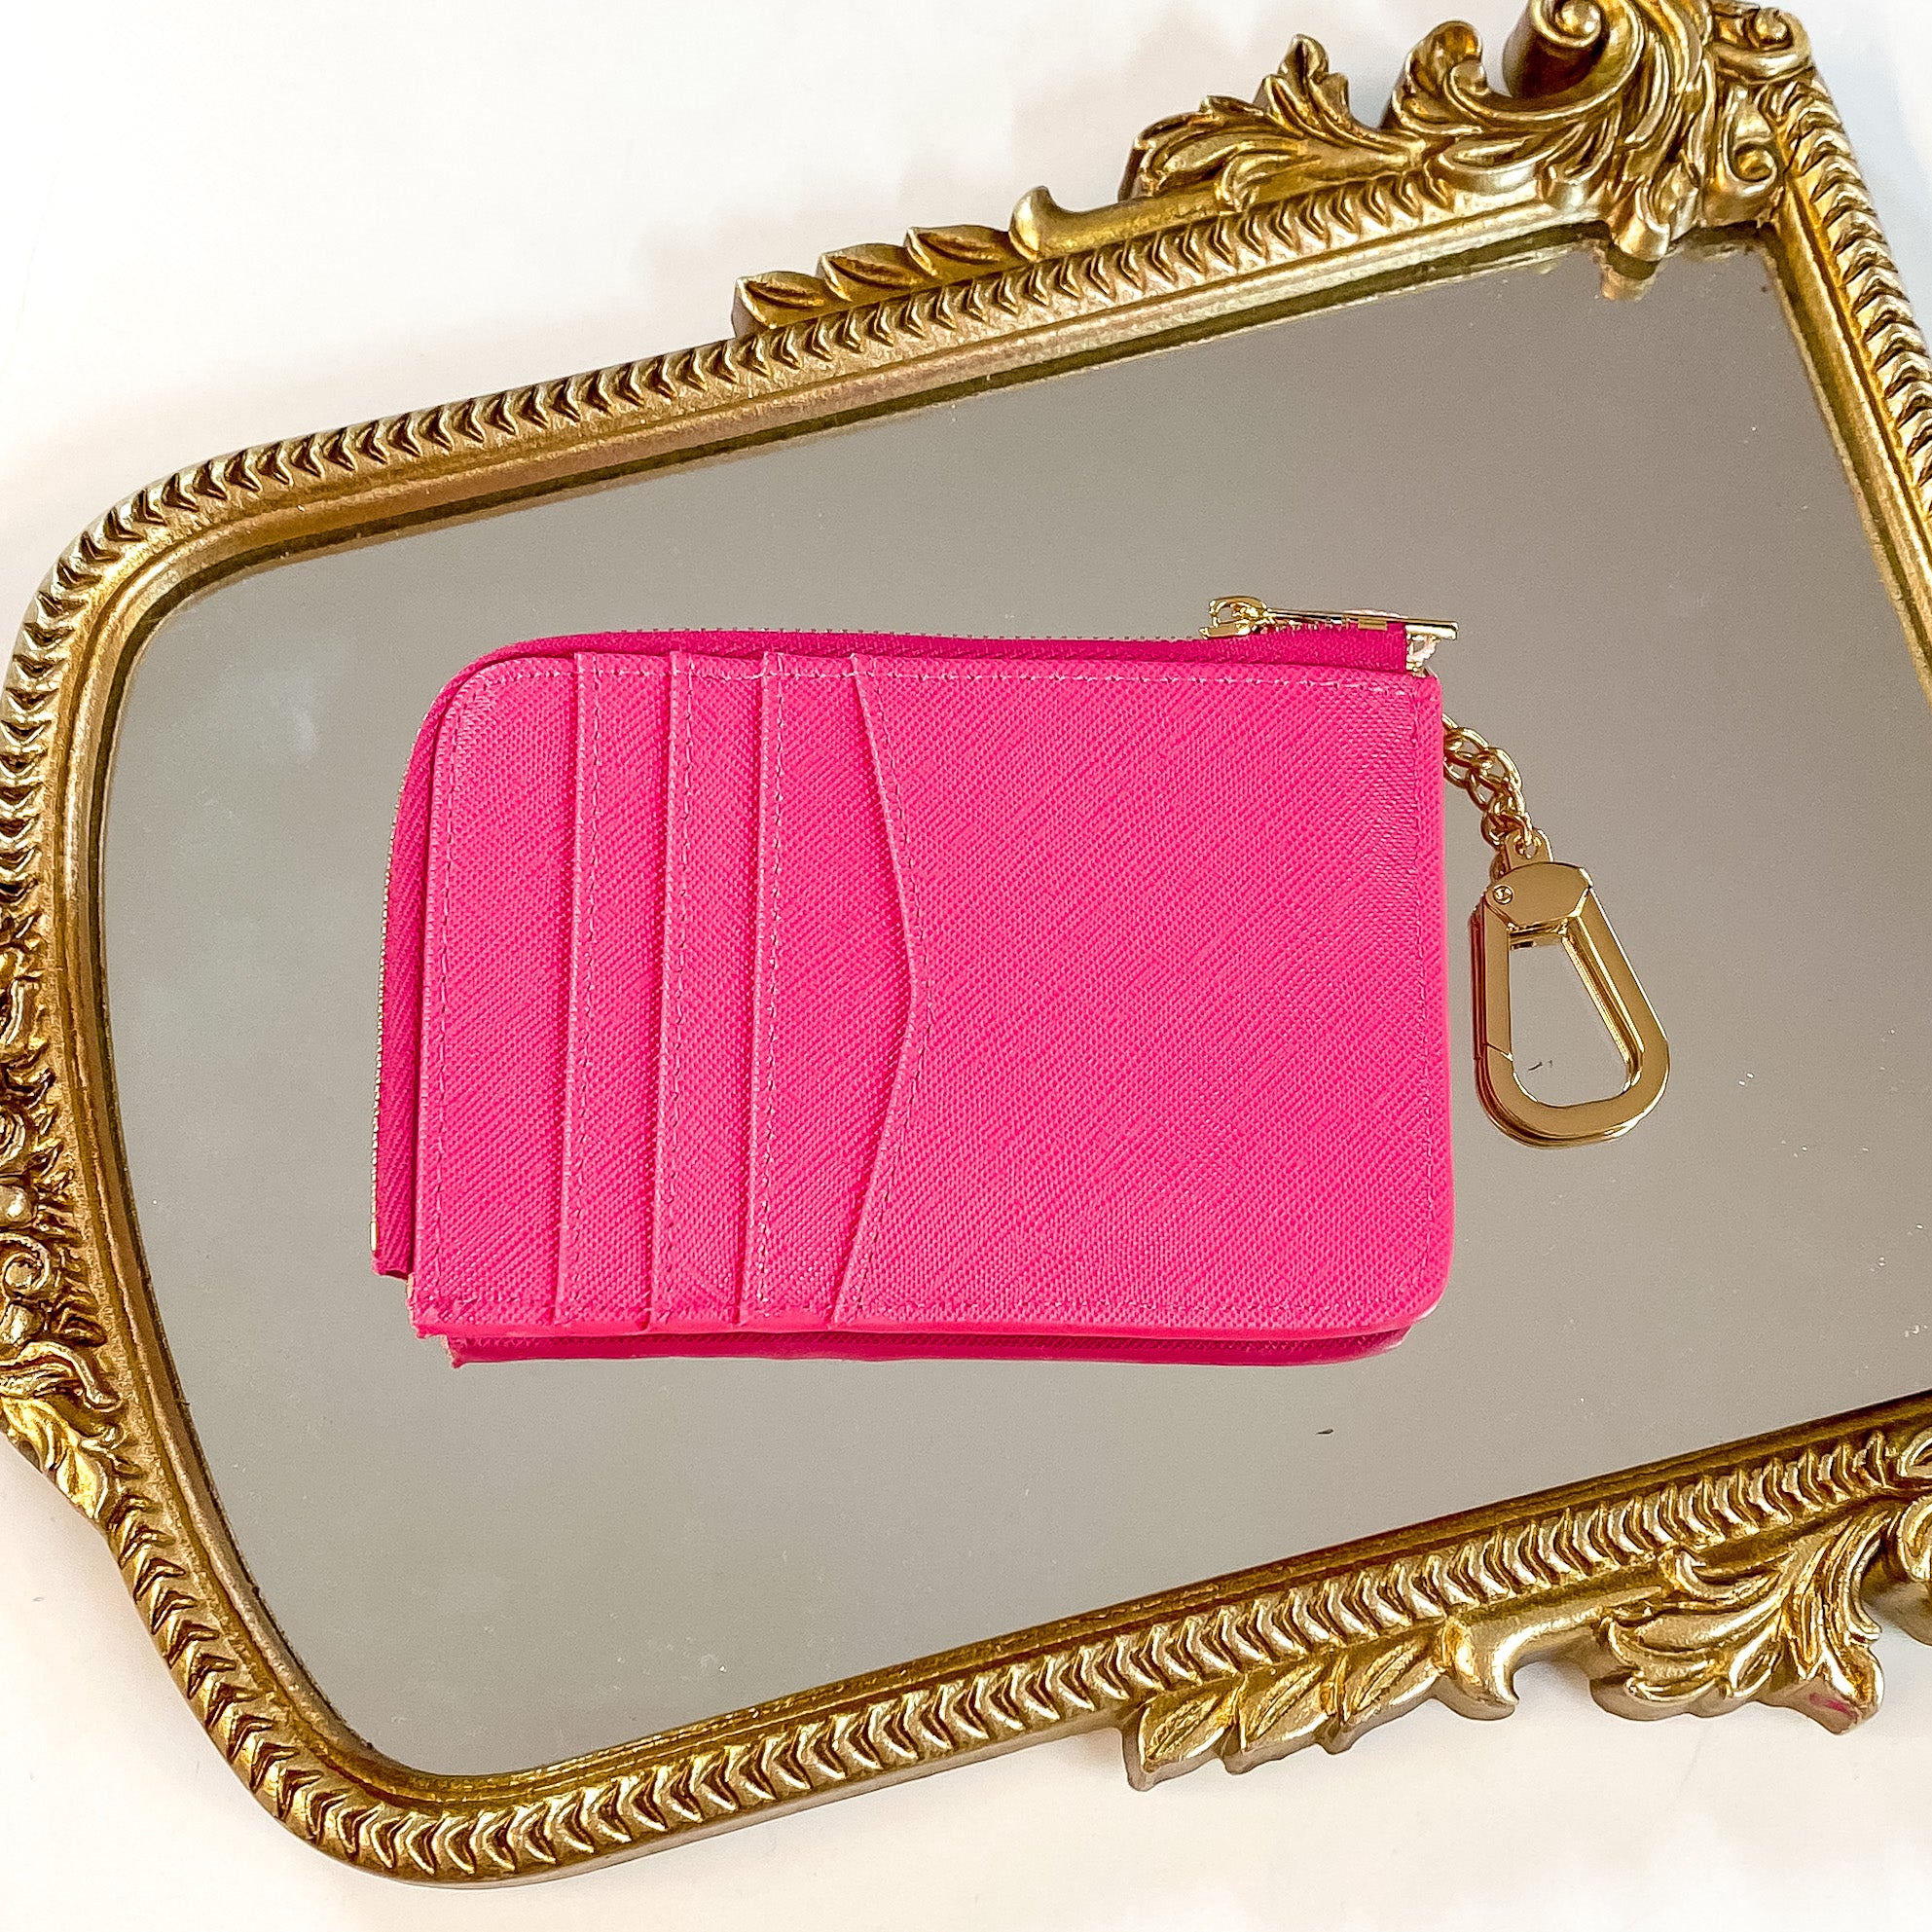 Hollis | COCO Card Holder in Hot Pink - Giddy Up Glamour Boutique